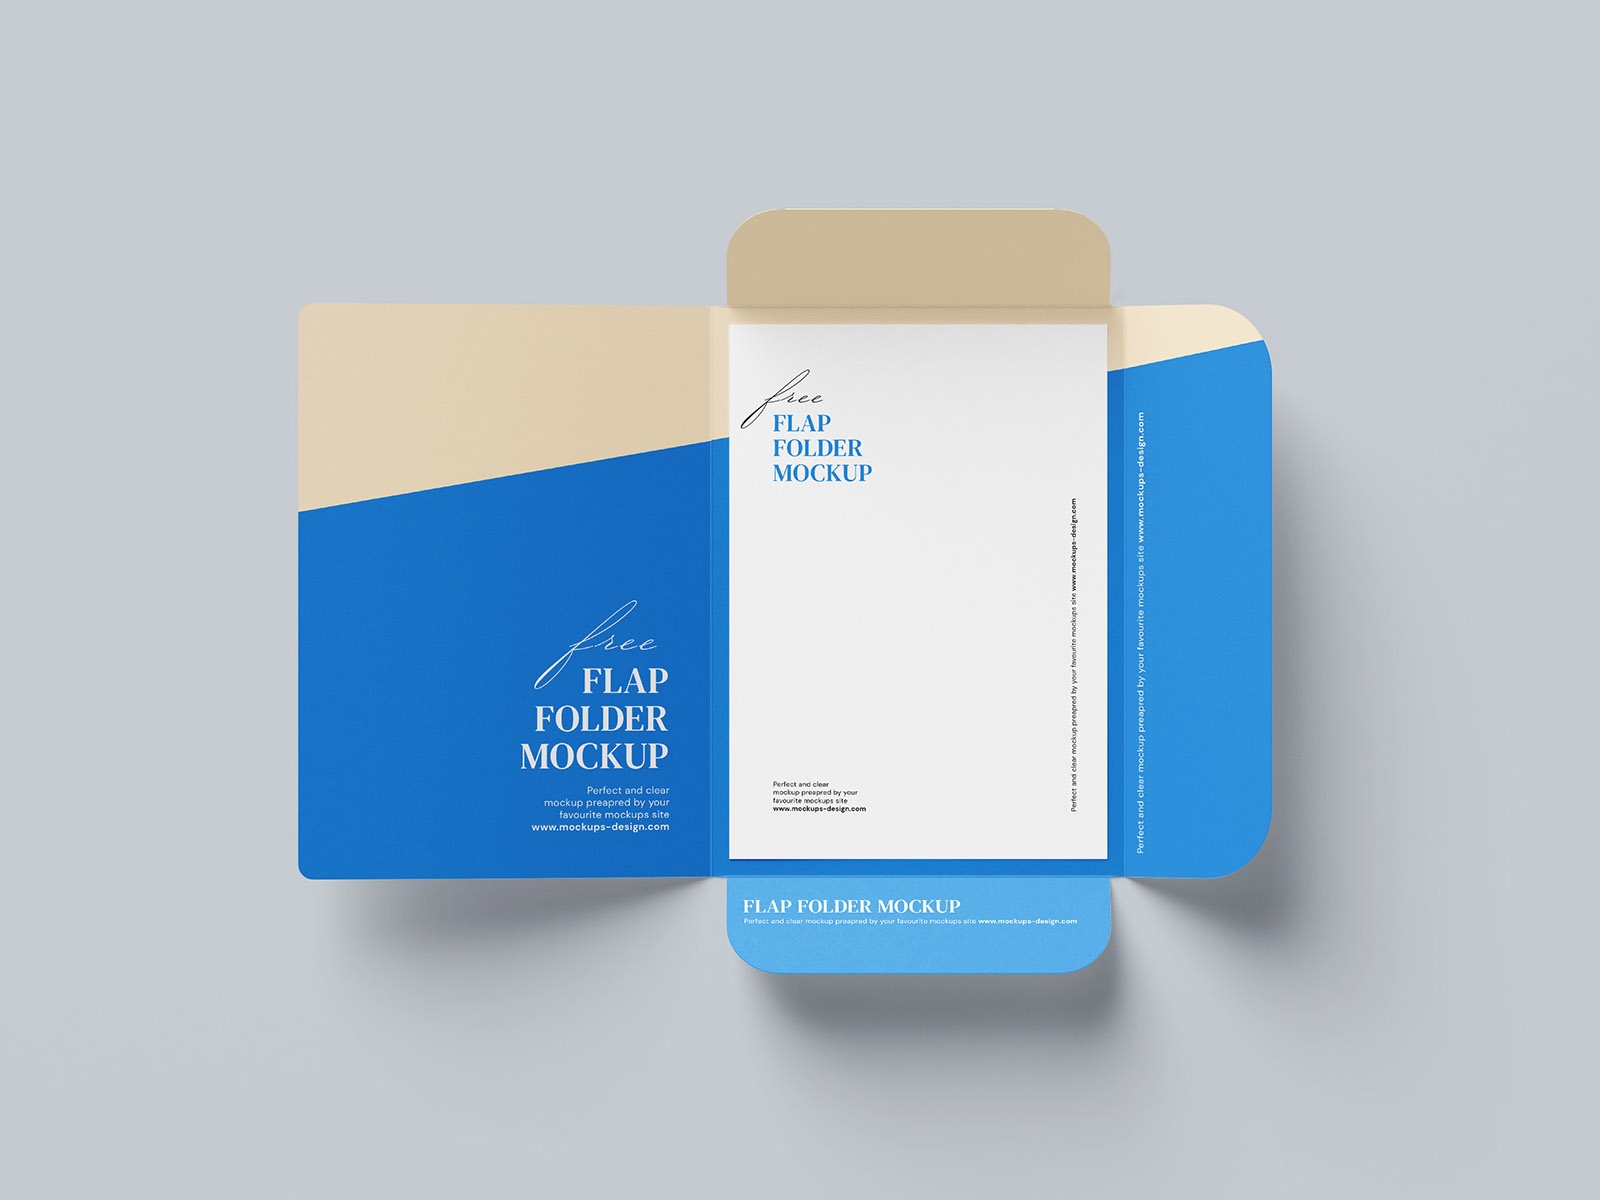 Four Flap Paper Folder Mockup from 4 Different Views FREE PSD